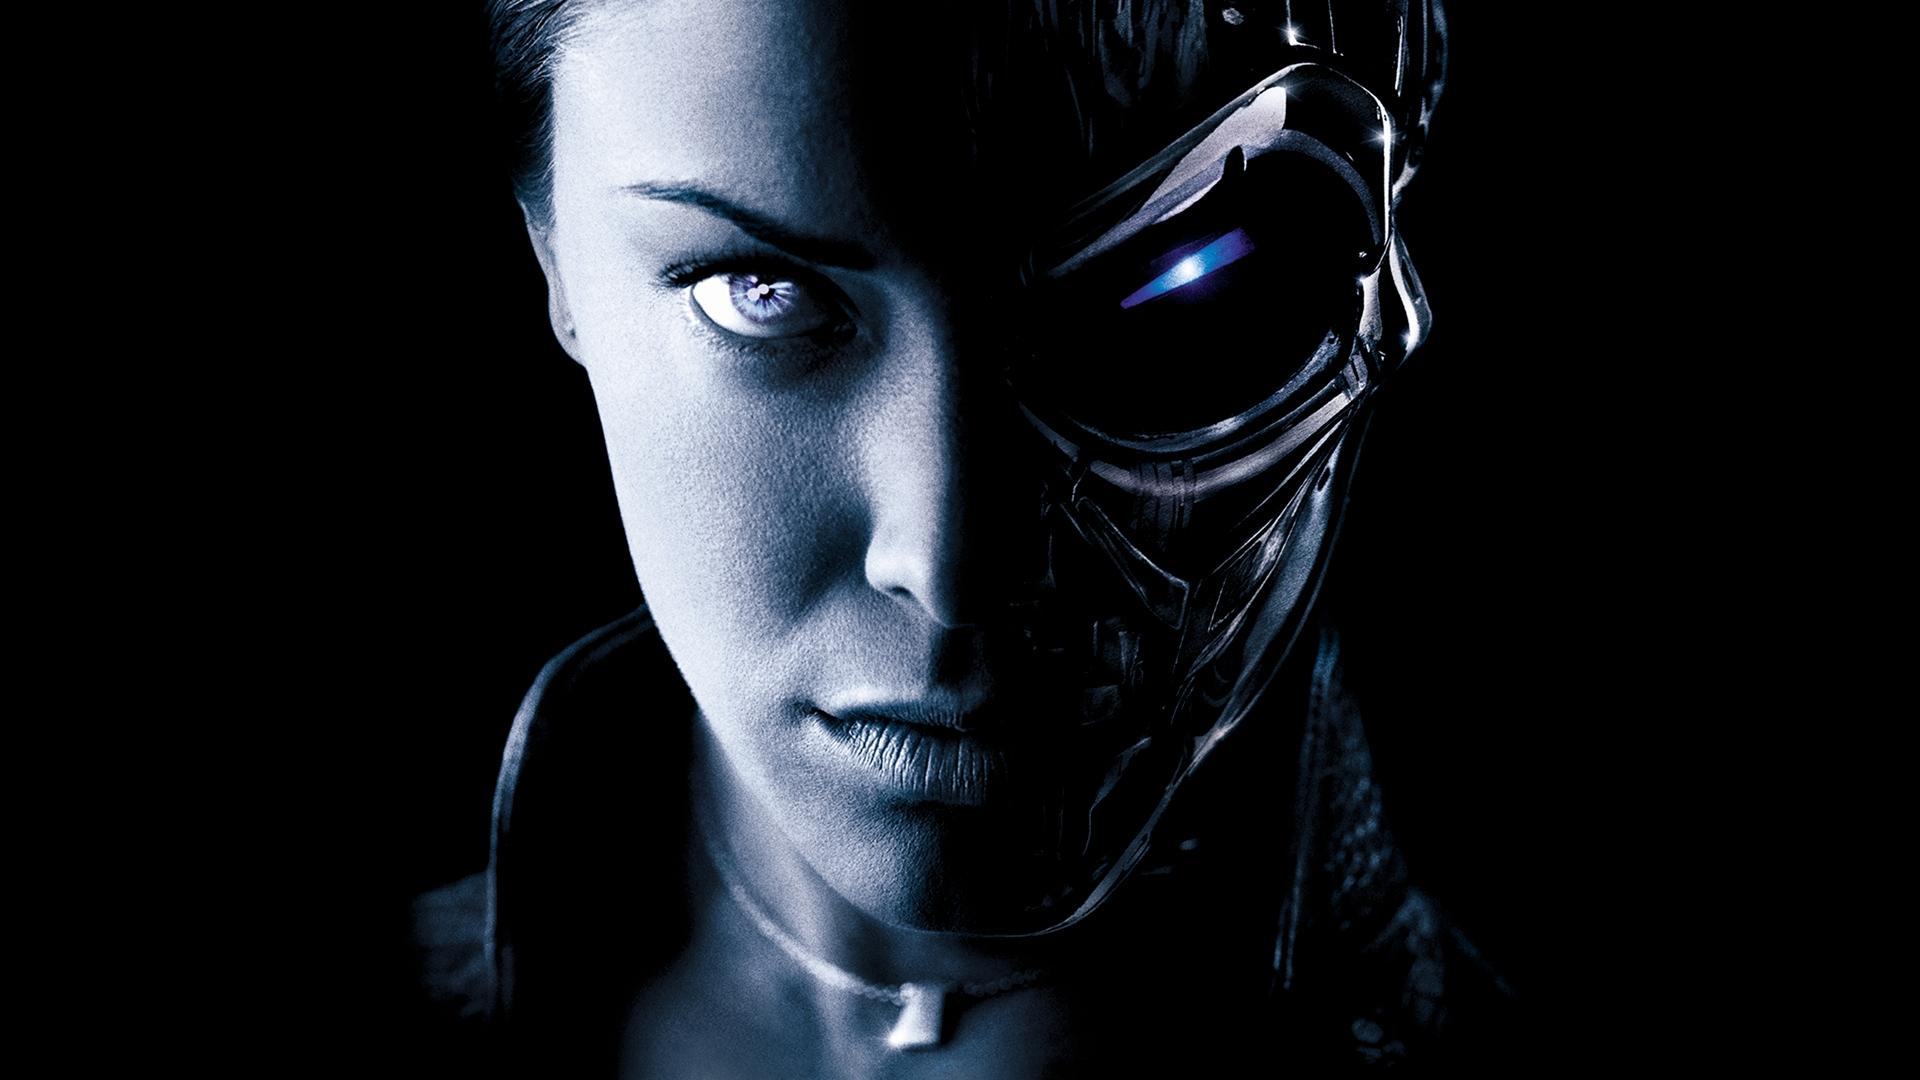 Download 1920x1080 Terminator 3: Rise Of The Machines, Cyborg